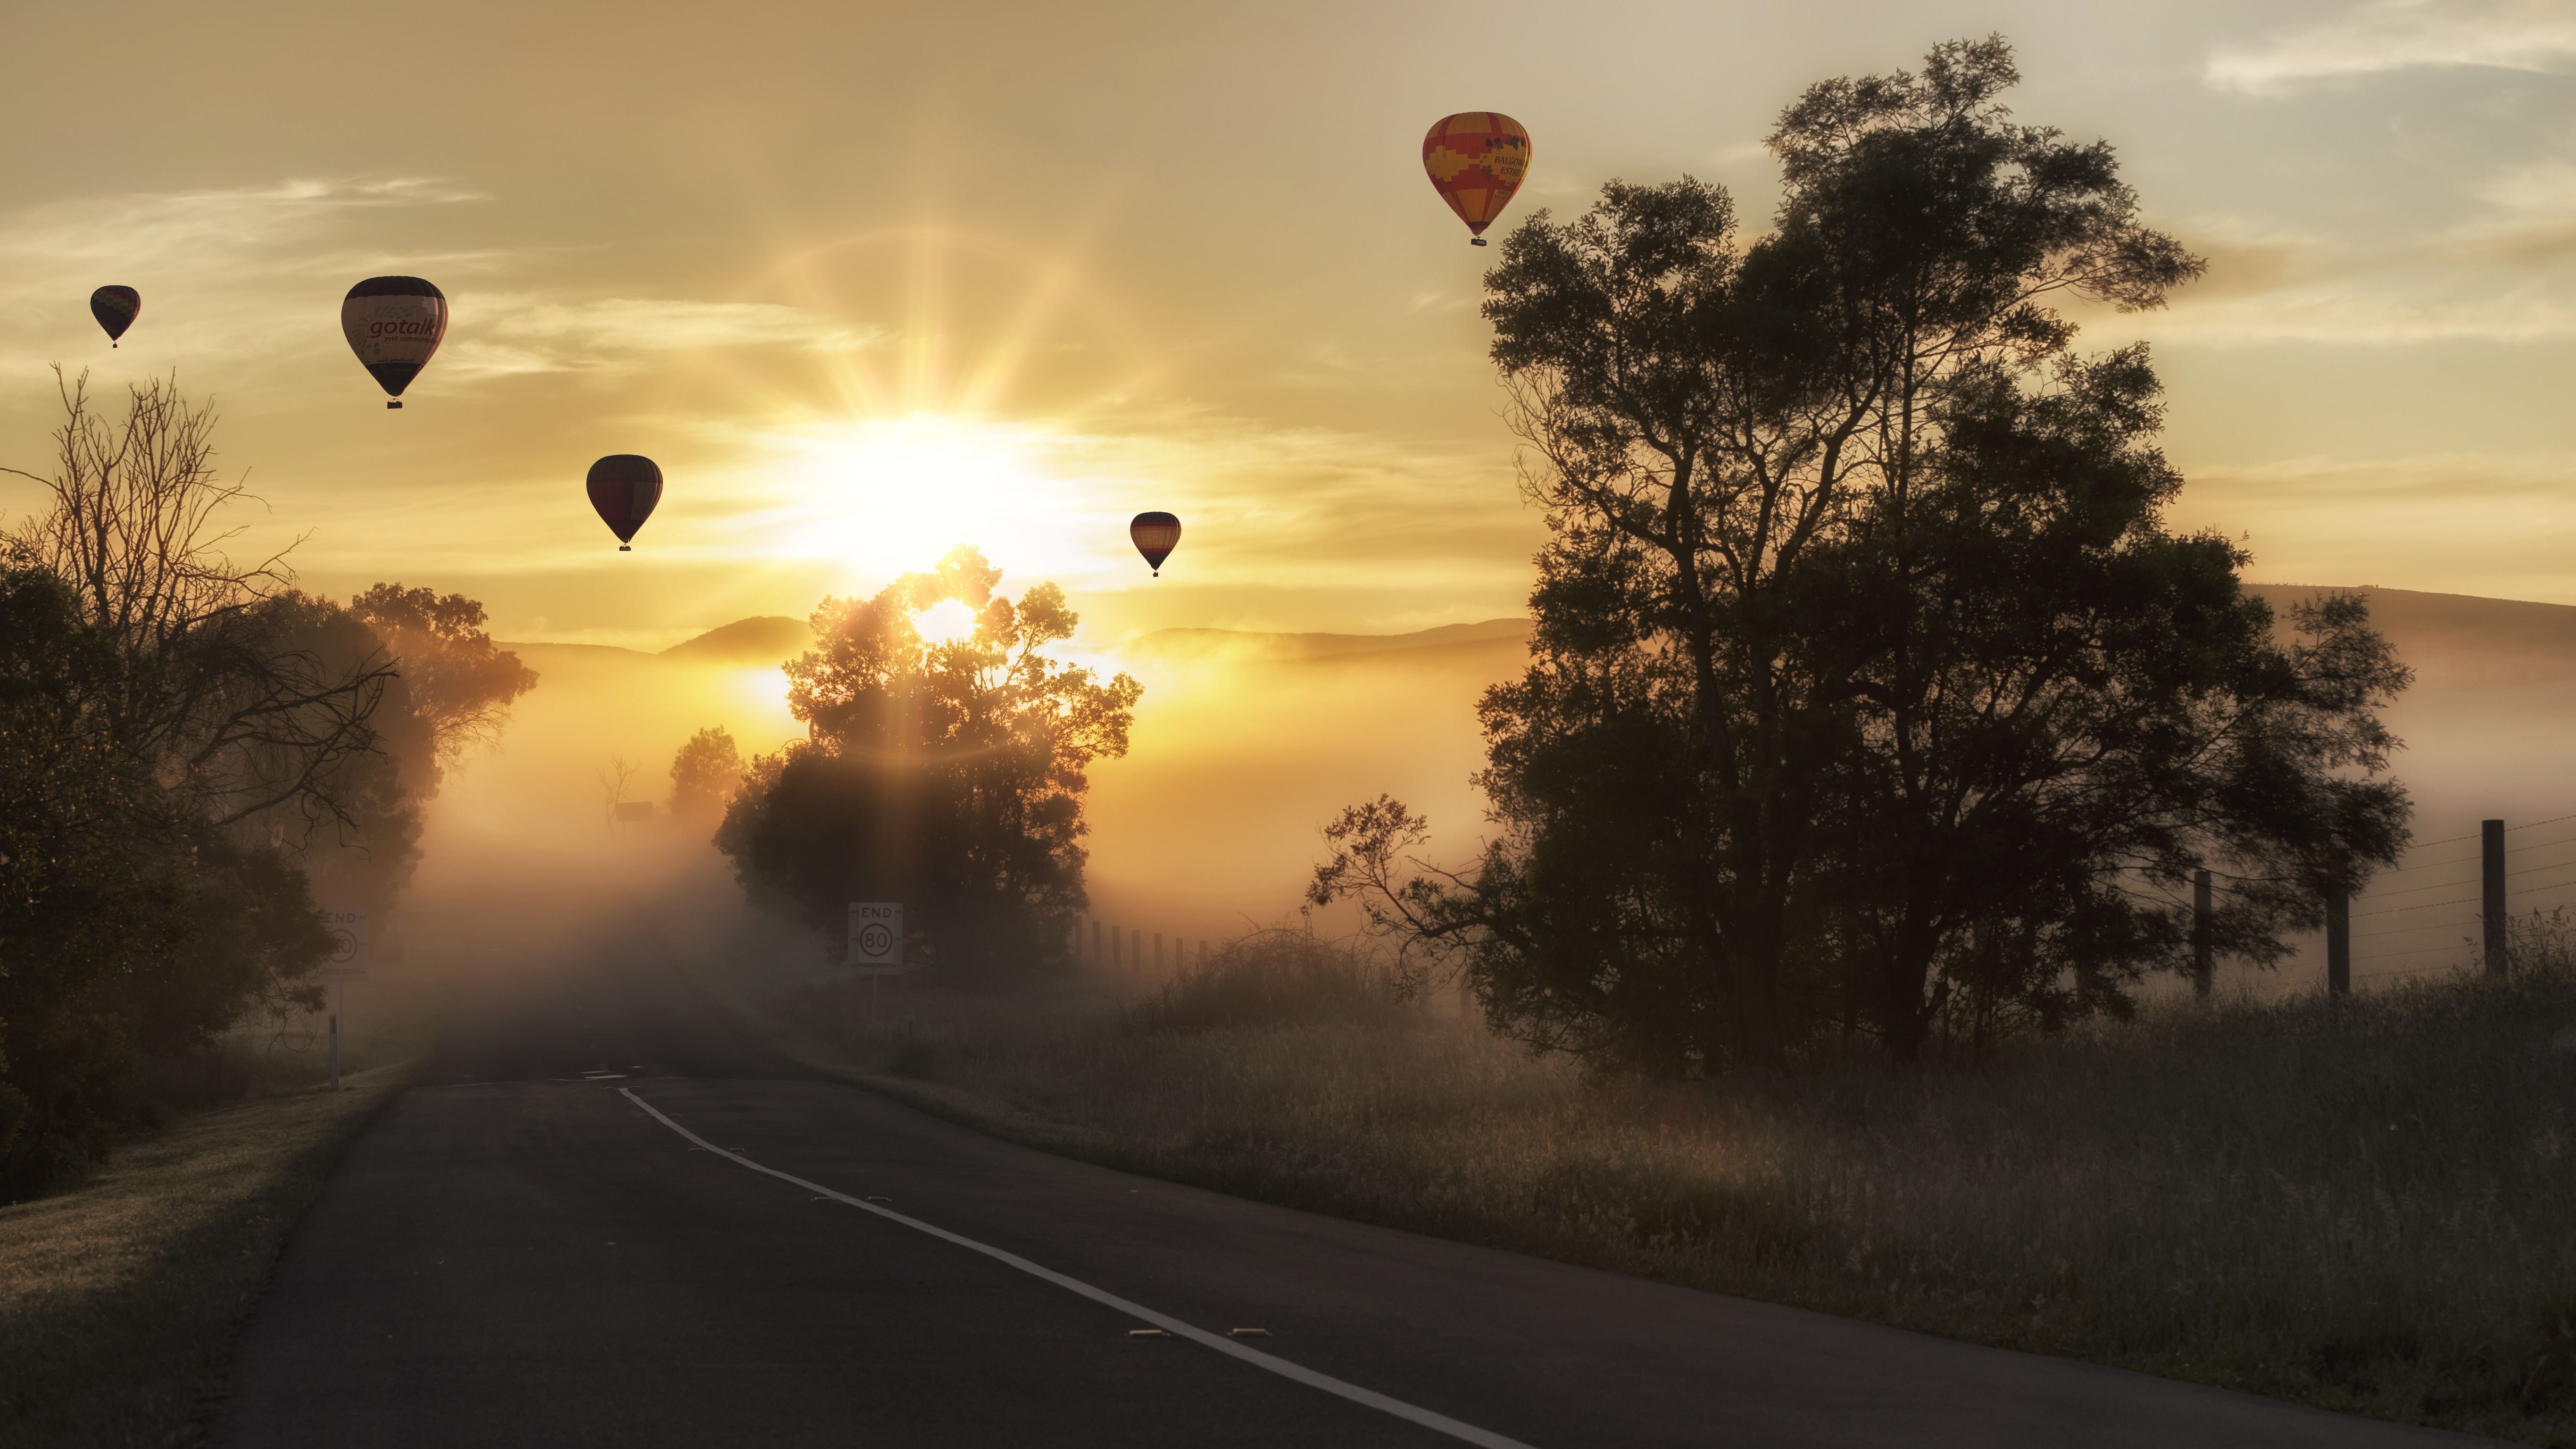 150462 download wallpaper nature, sunset, balloons, road, fog, sunlight screensavers and pictures for free